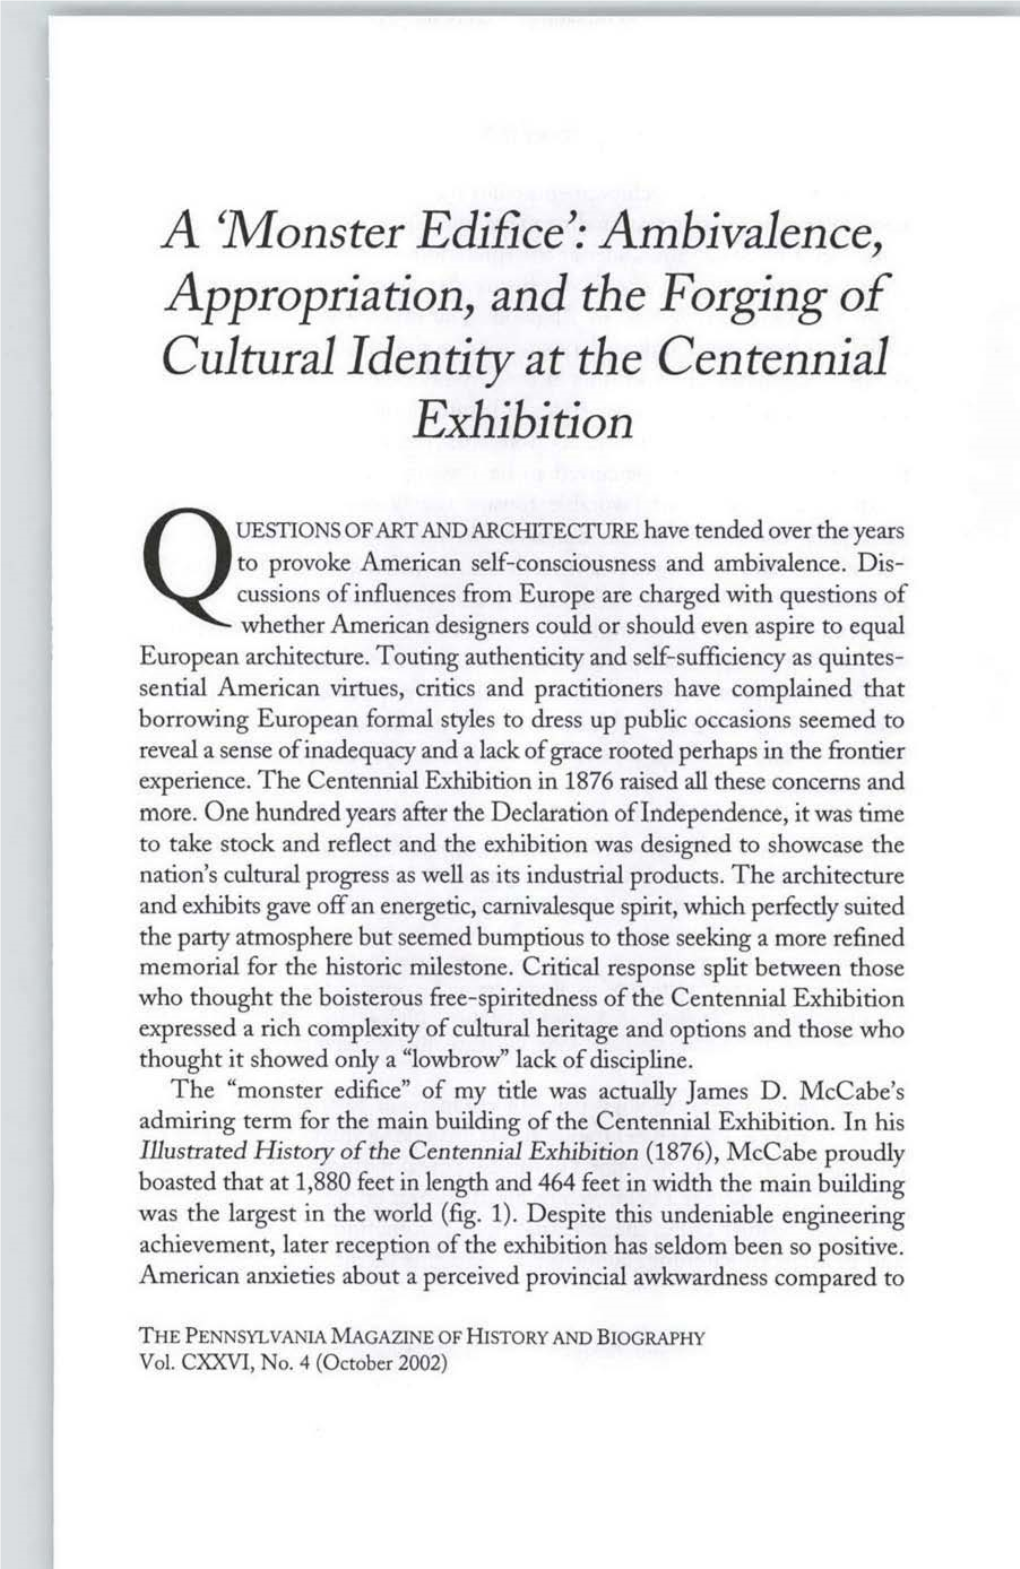 Ambivalence, Appropriation, and the Forging of Cultural Identity at the Centennial Exhibition